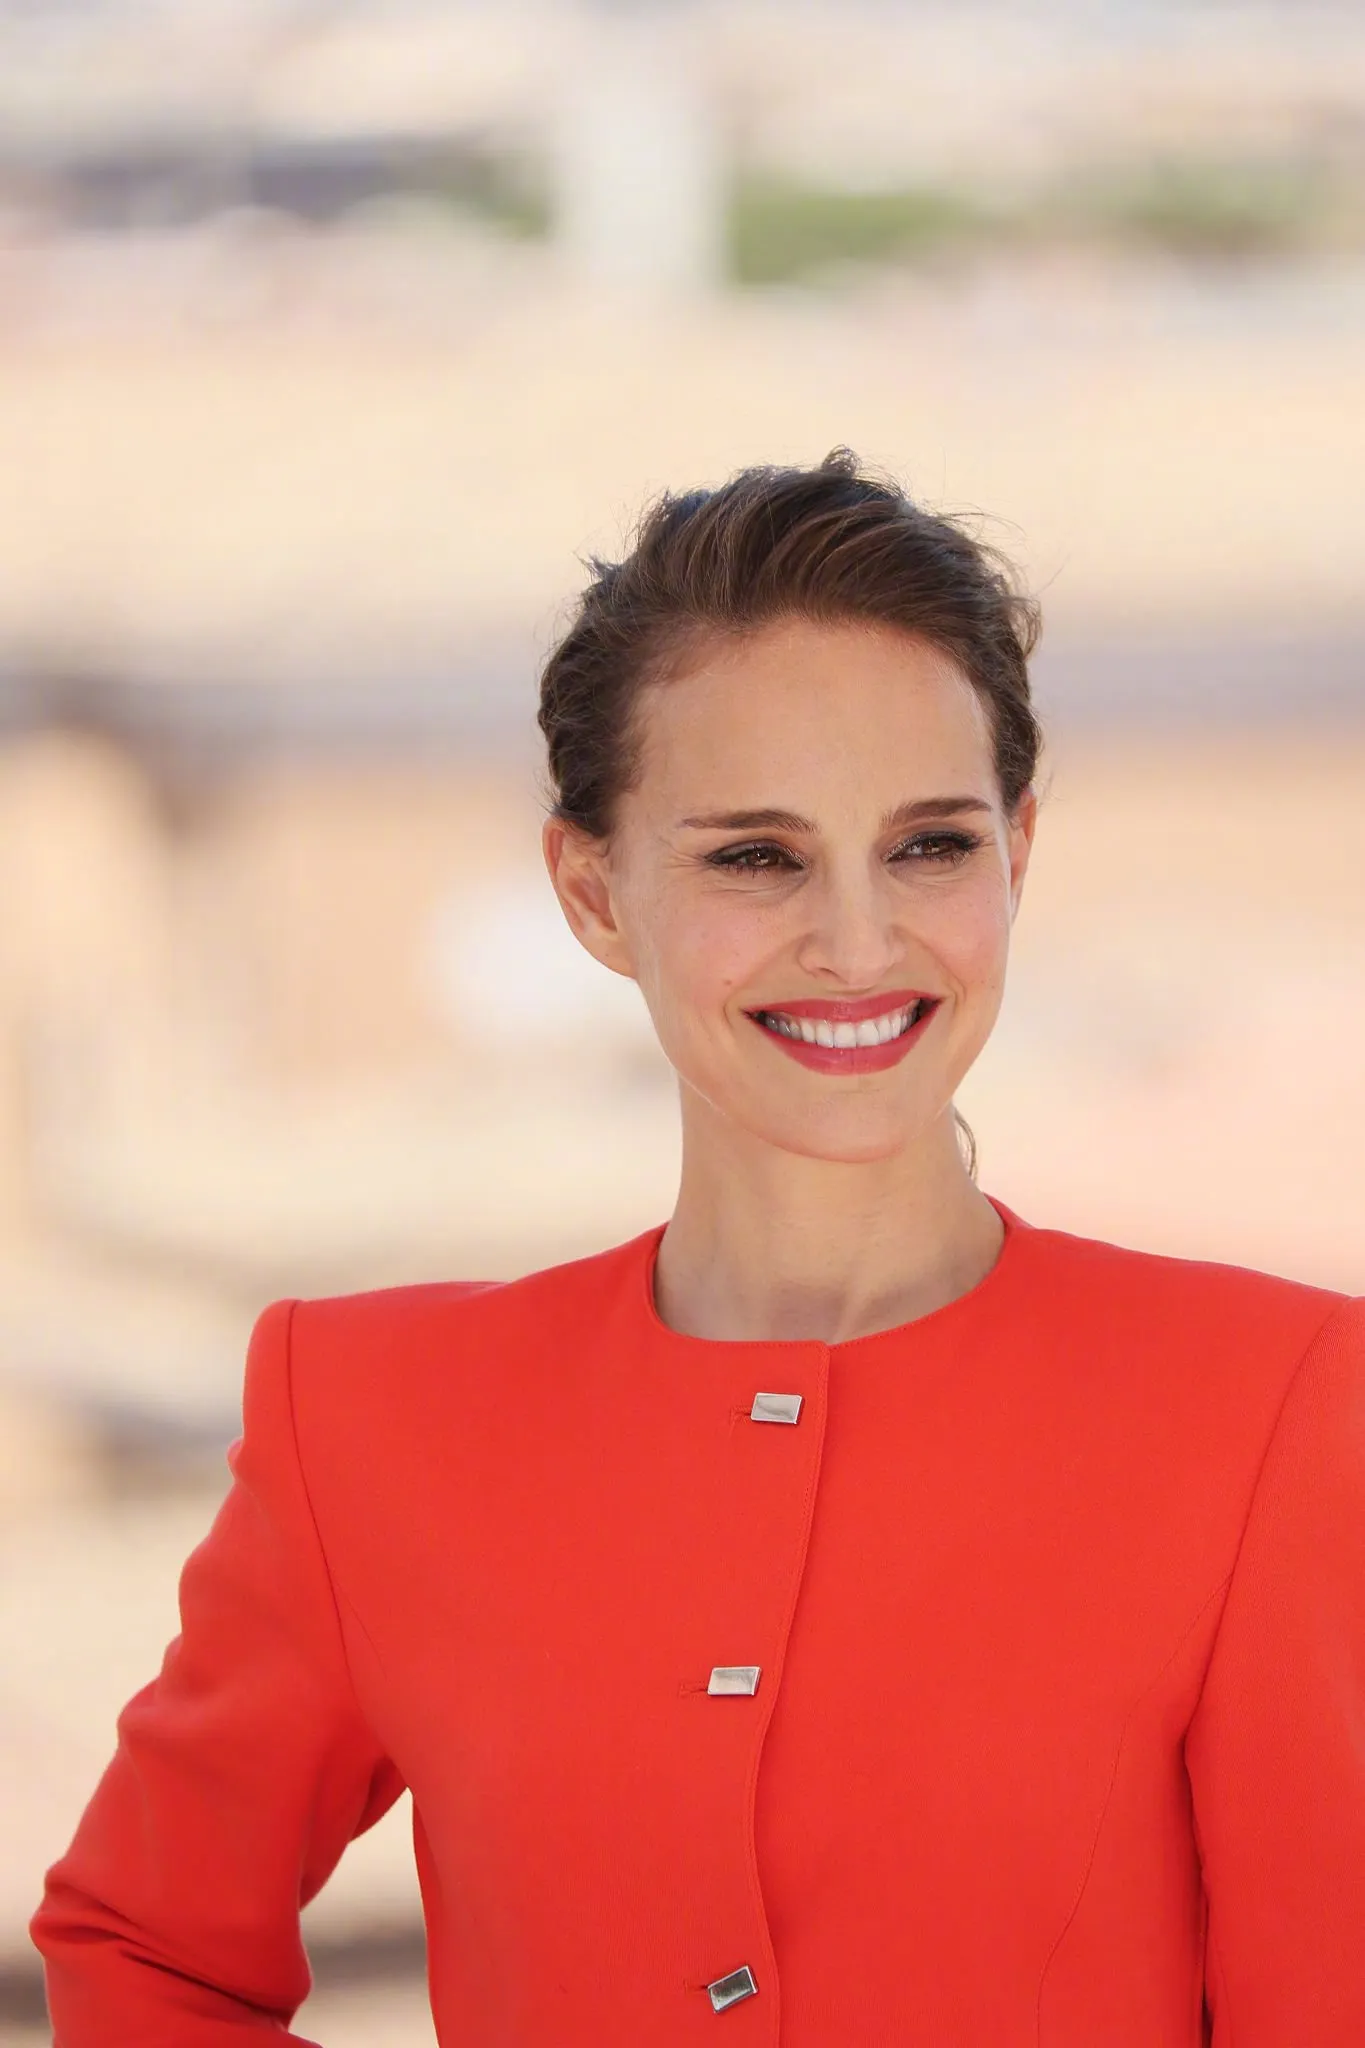 Natalie Portman at 'Thor: Love and Thunder' promotional event in Rome | FMV6